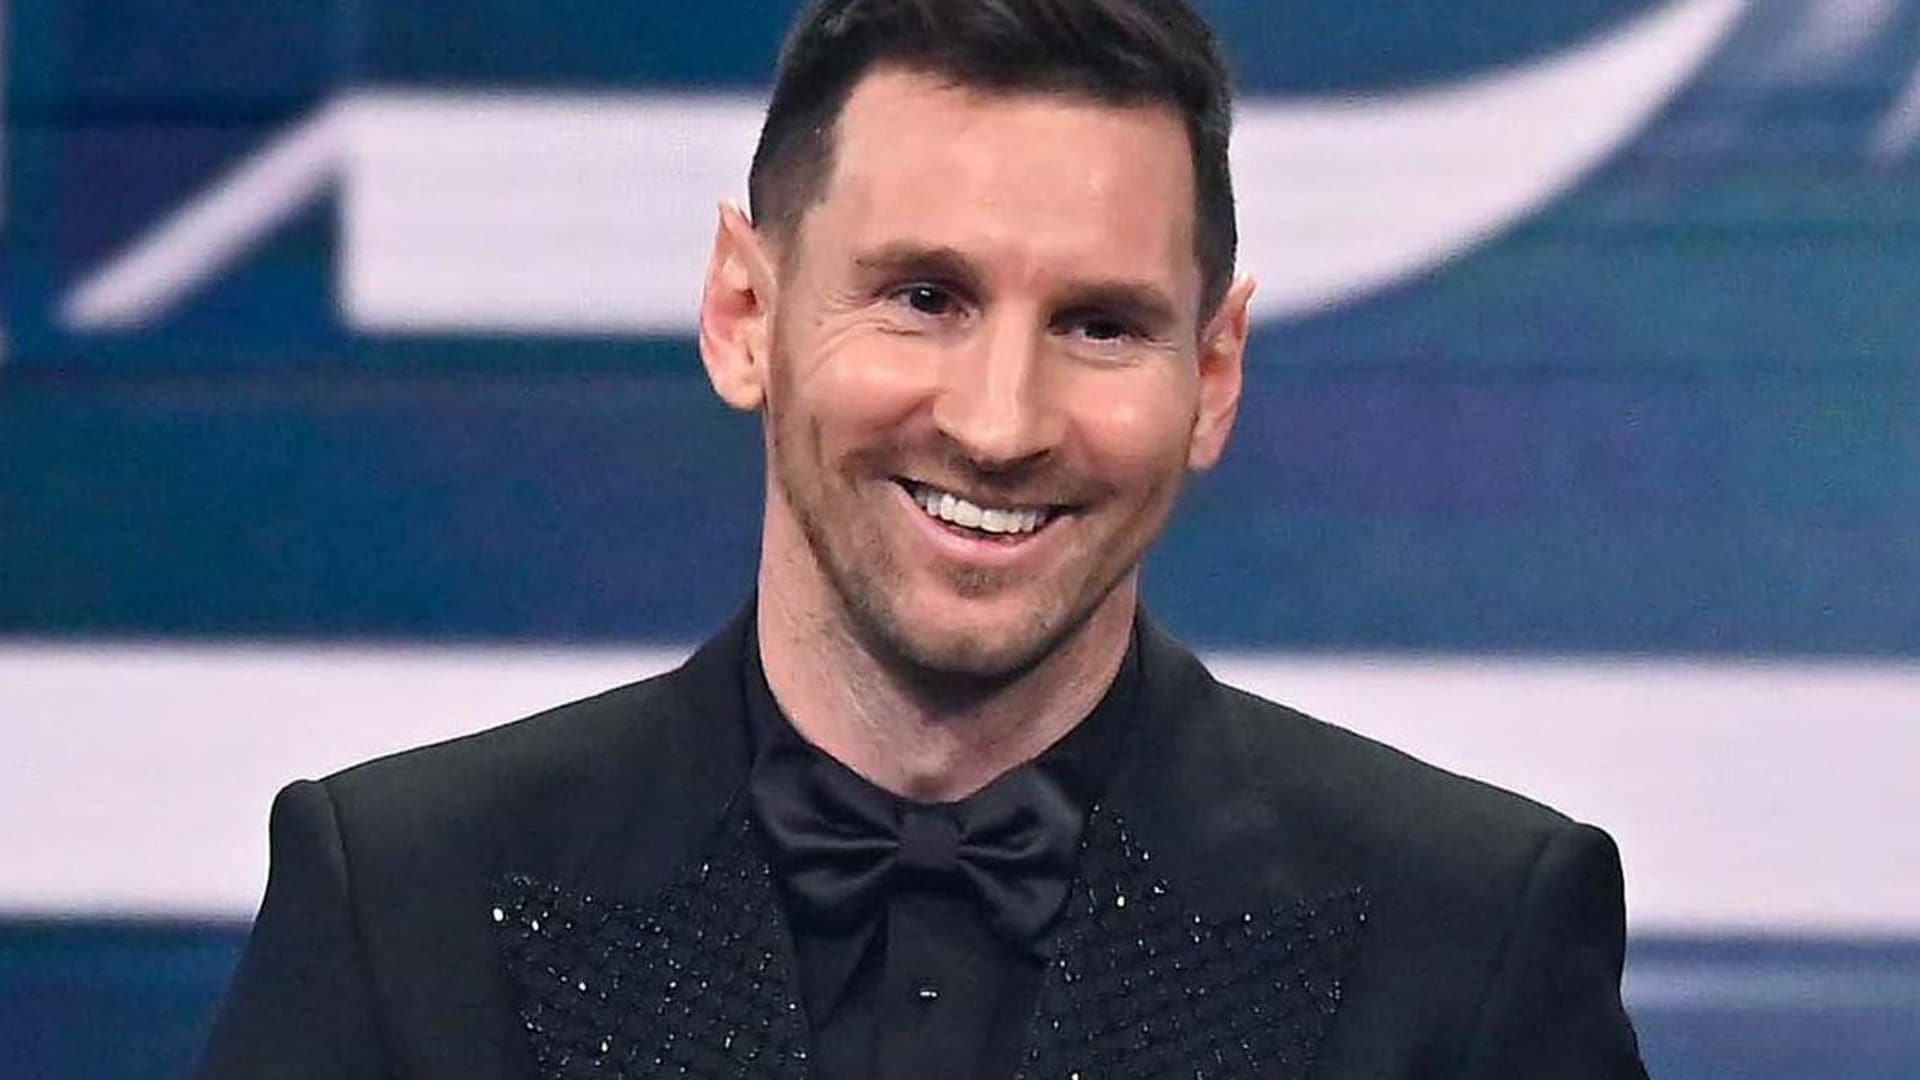 Lionel Messi joined by Ted Lasso star in Super Bowl ad: Watch